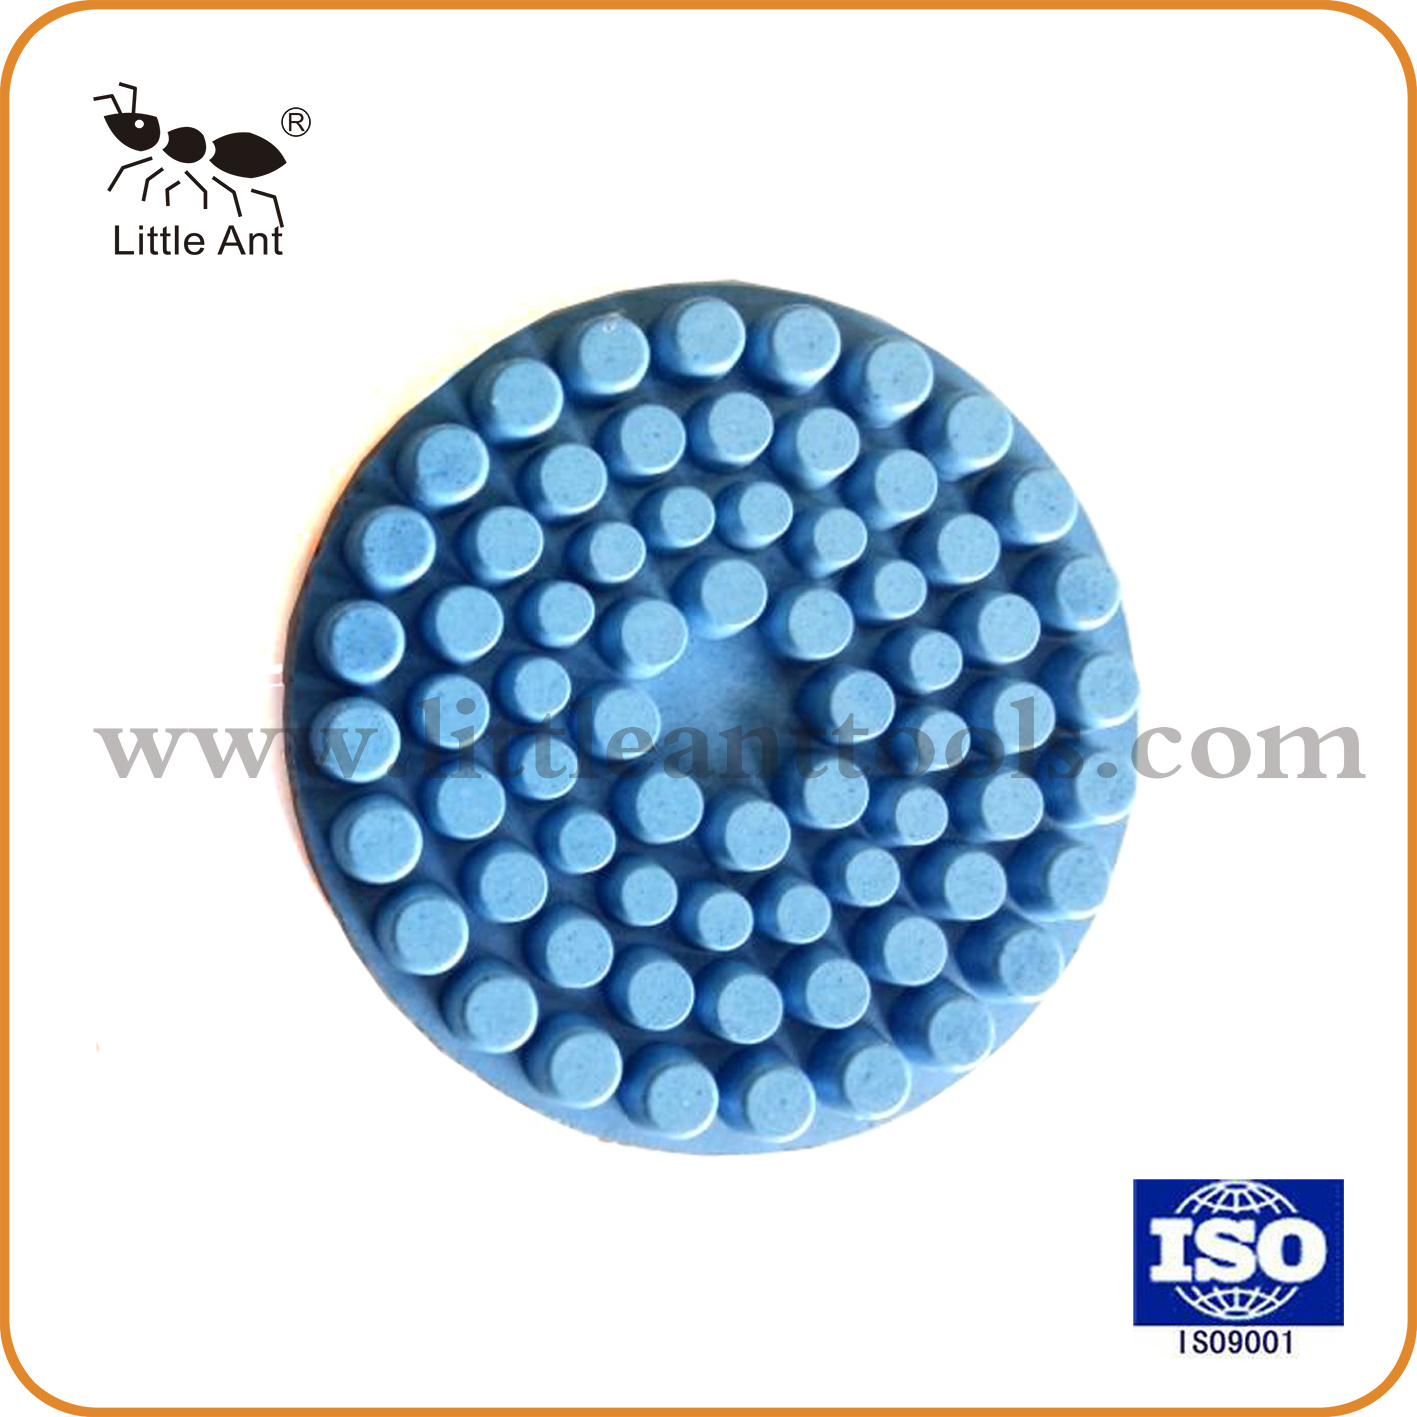 4inch Diamond Concrete Grinding Pad From China